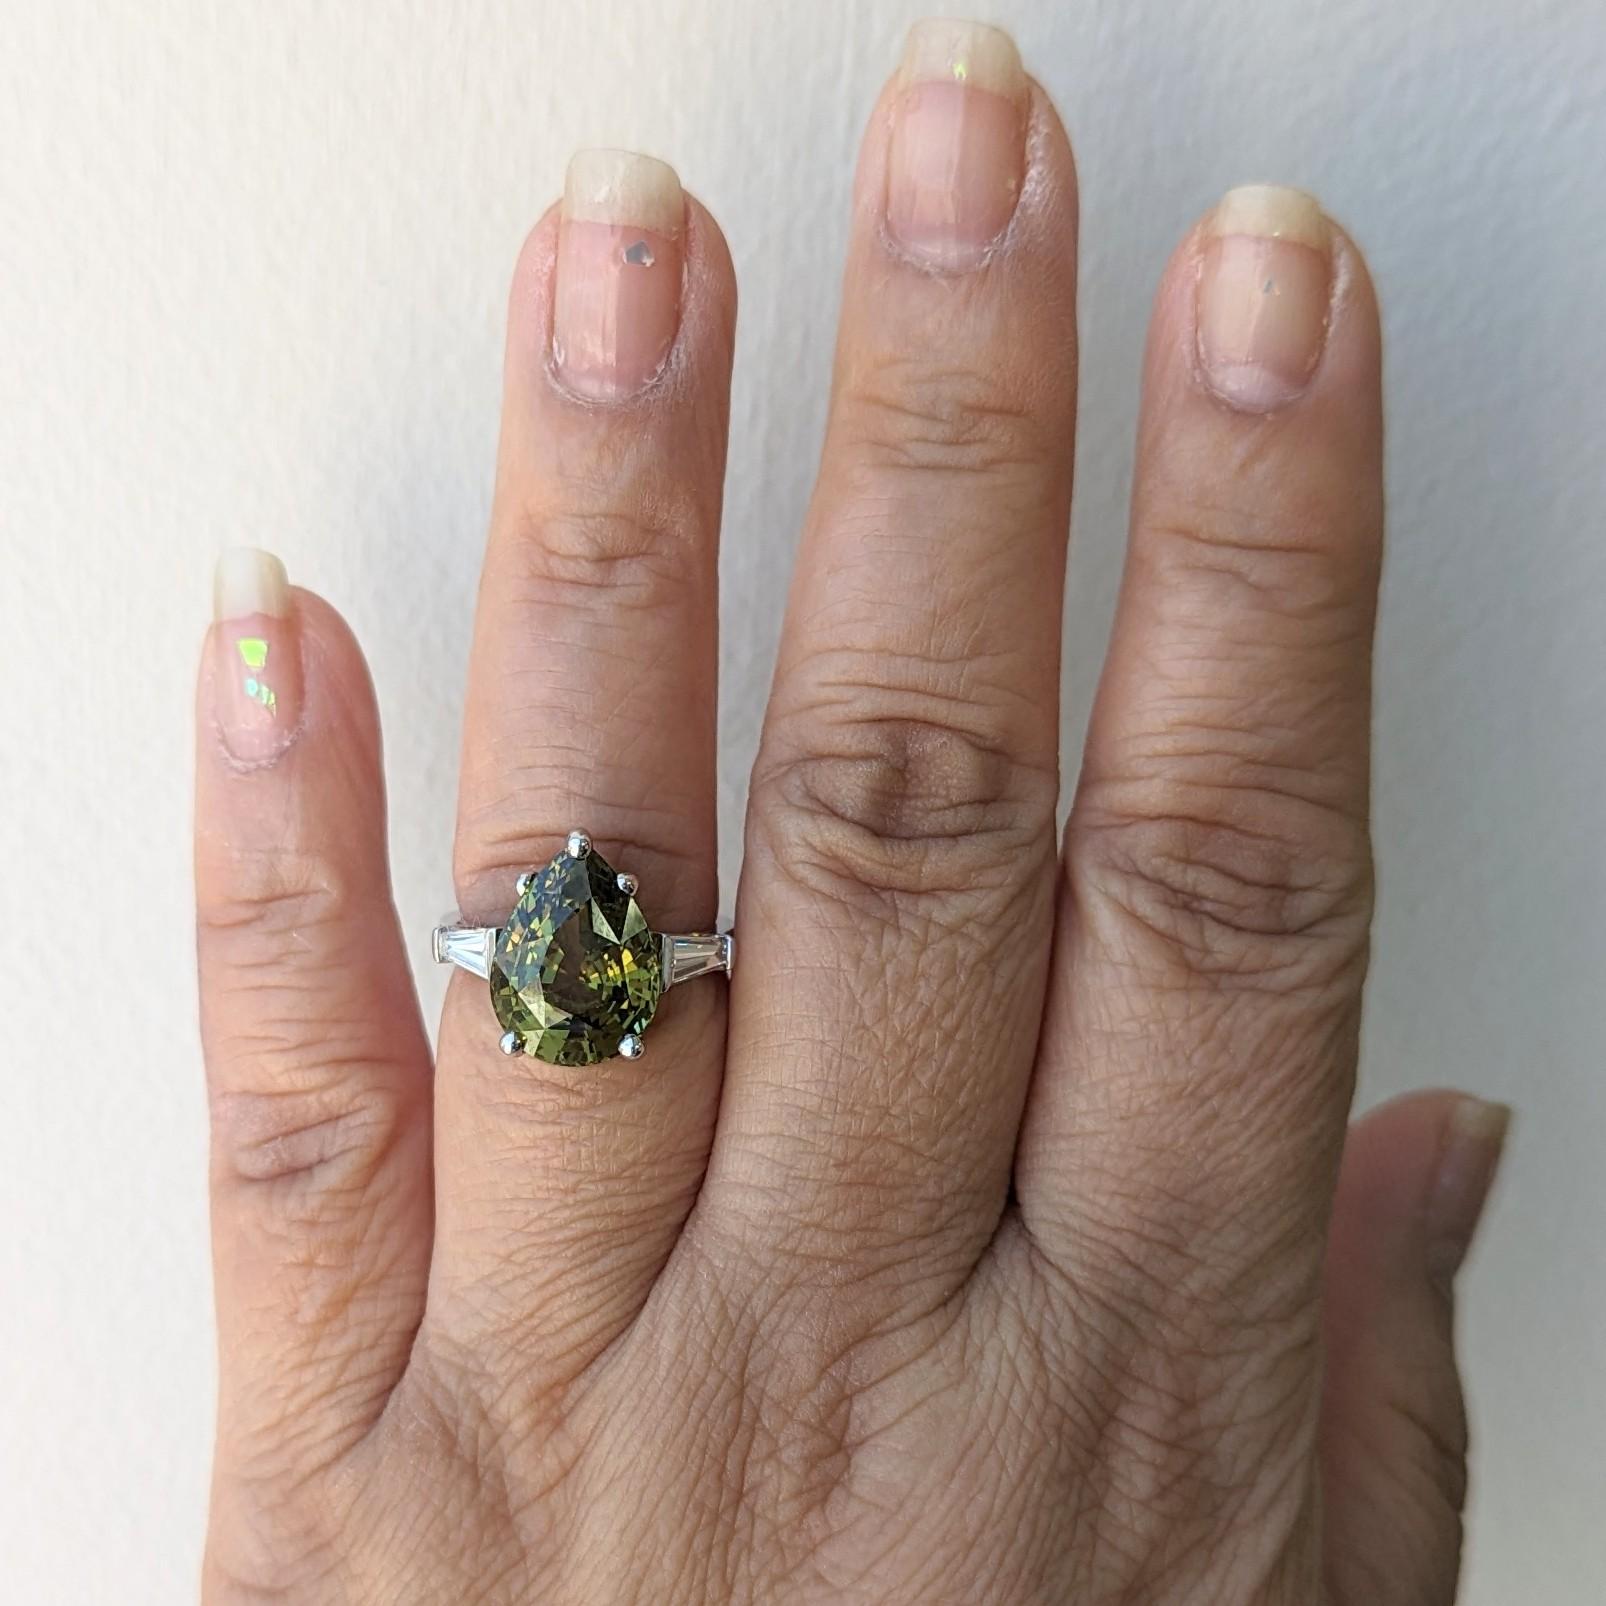 Gorgeous 8.53 ct. color change alexandrite pear shape with good quality white diamond baguettes.  Handmade in 18k white gold.  Ring size 7.  The color changes from yellow green to brownish yellow.  GIA certificate included.